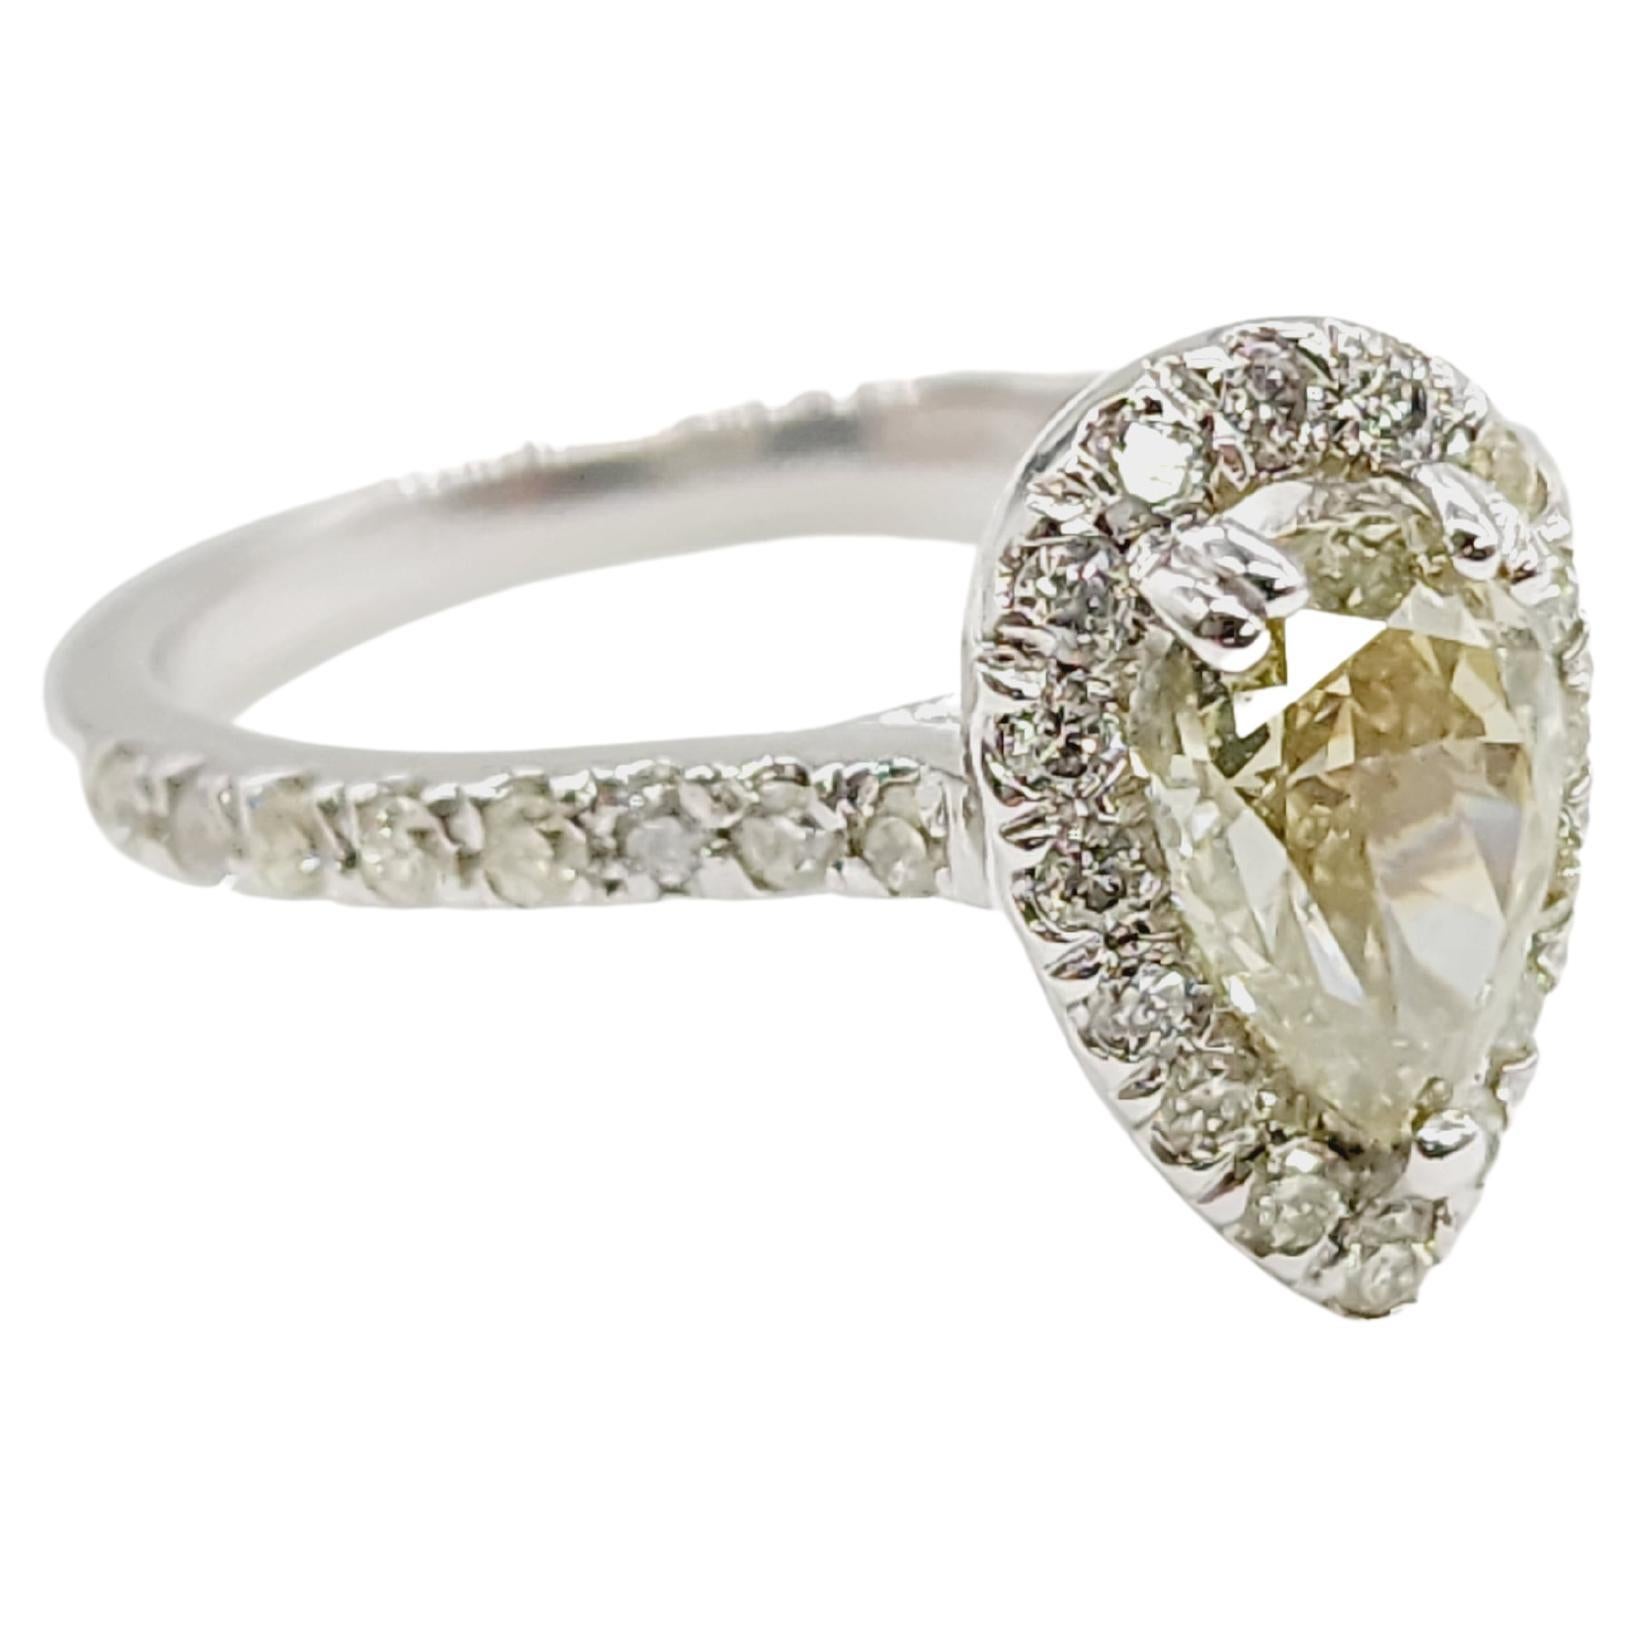 GIA CHAMELEON Fancy Brownish Greenish Yellow Pear Shape Natural Diamond Weighs 1.11 carats. 
Surrounded by paved white diamonds in the halo 14 karat white gold setting. 
Ring size 6.5